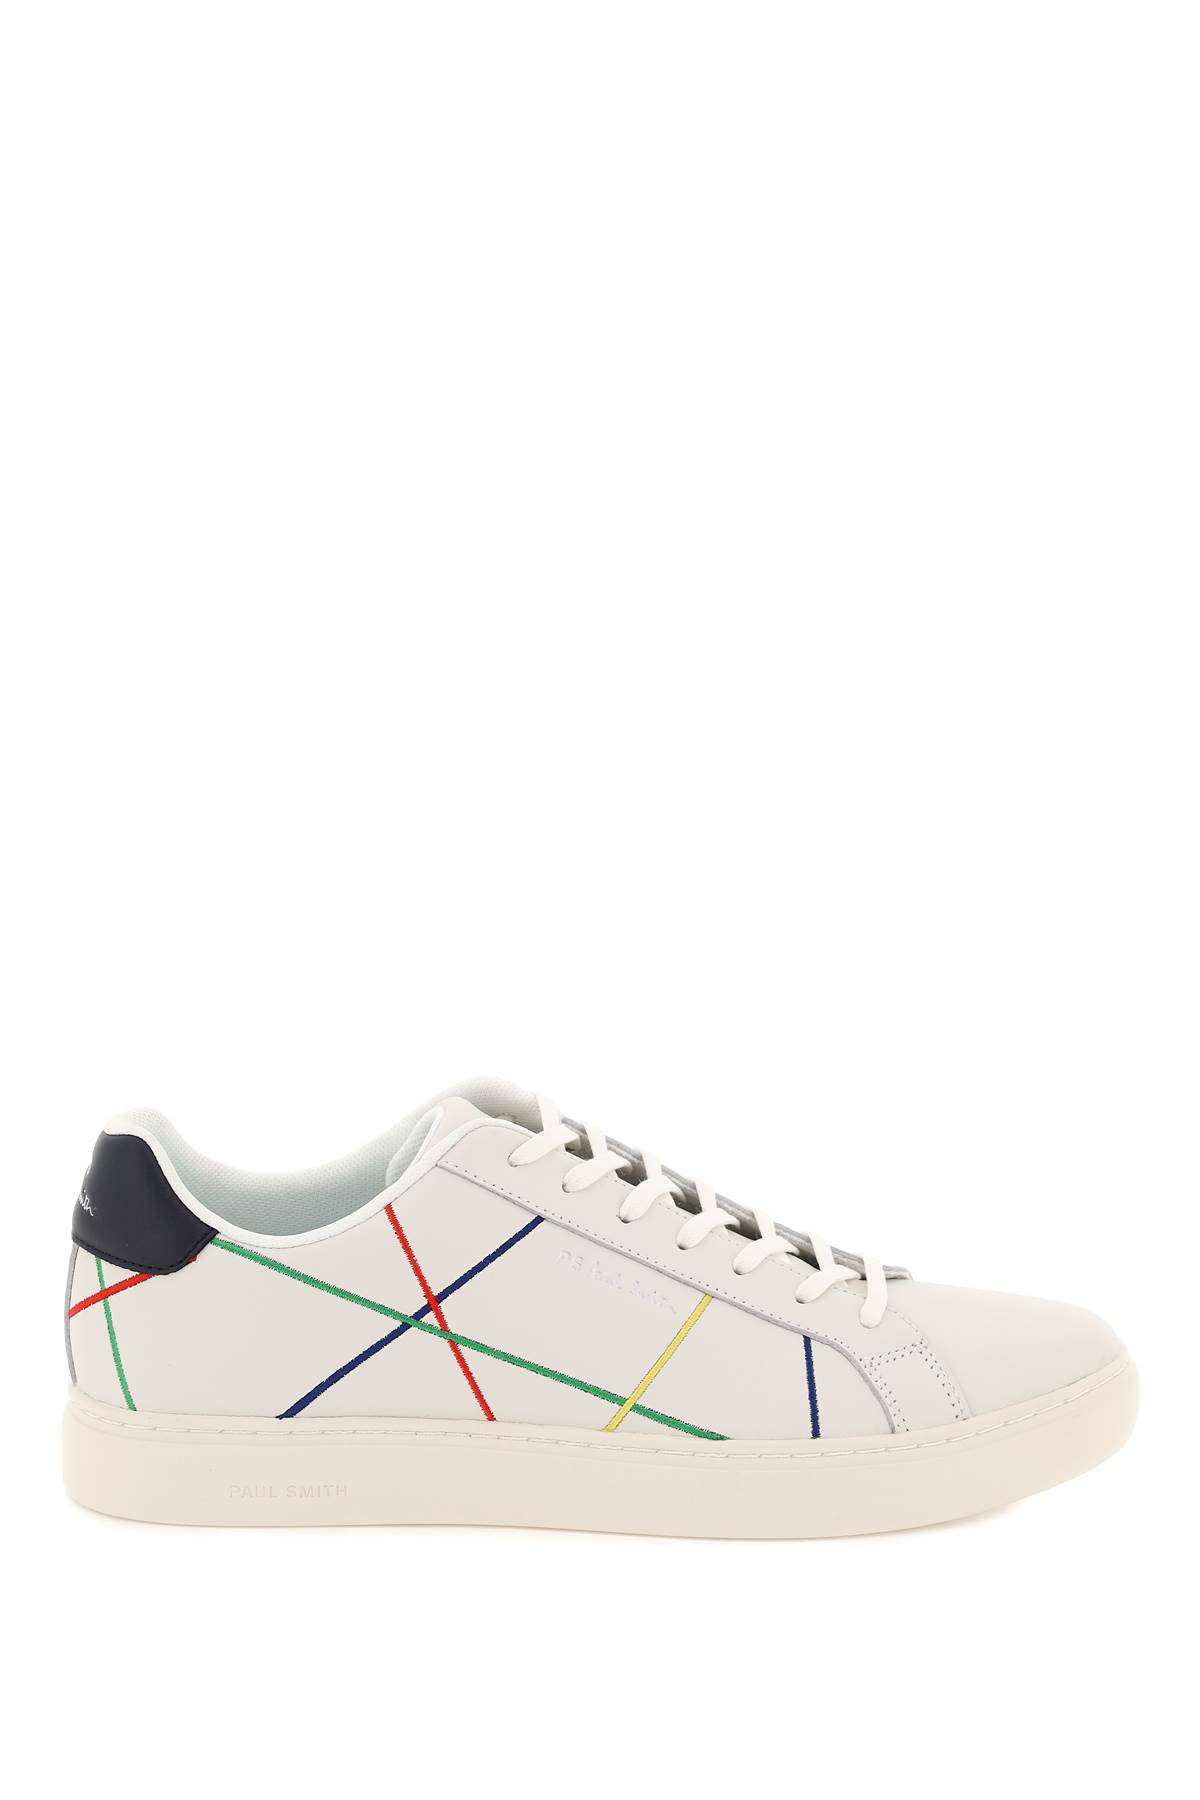 PS BY PAUL SMITH REX SNEAKERS